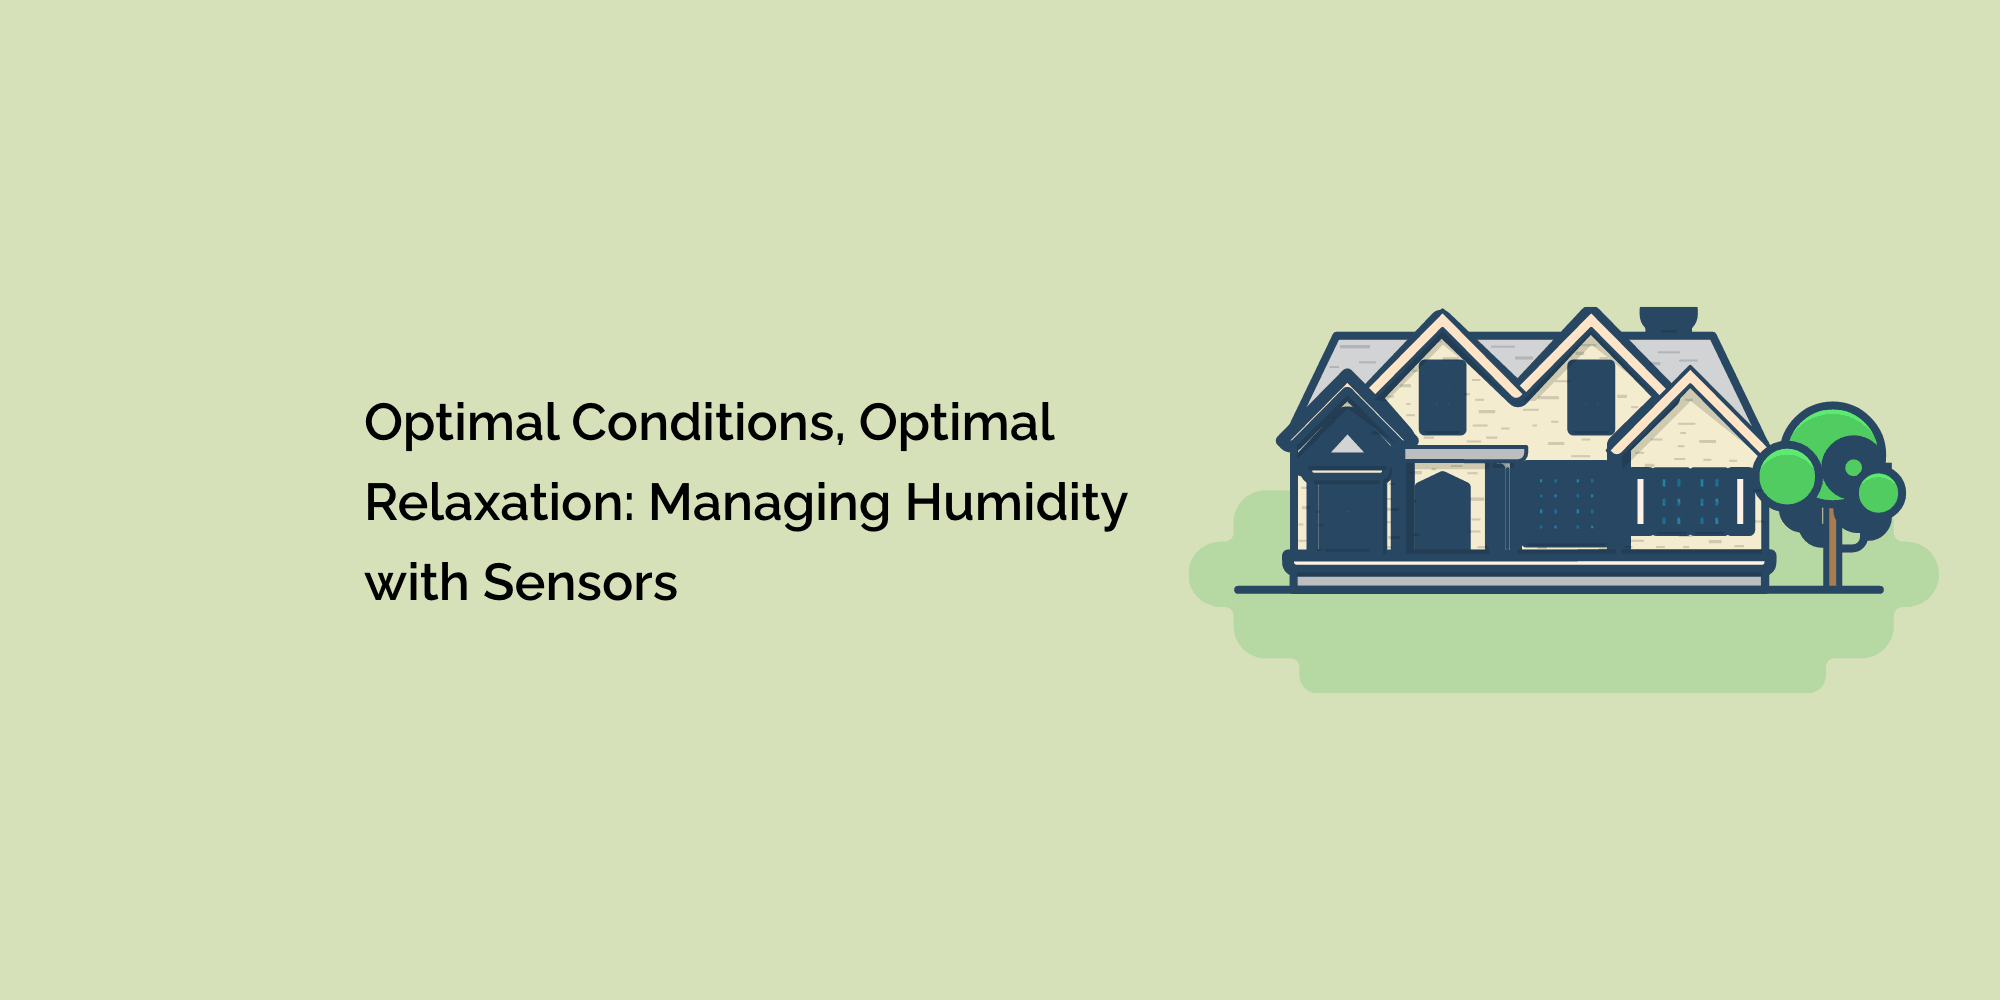 Optimal Conditions, Optimal Relaxation: Managing Humidity with Sensors